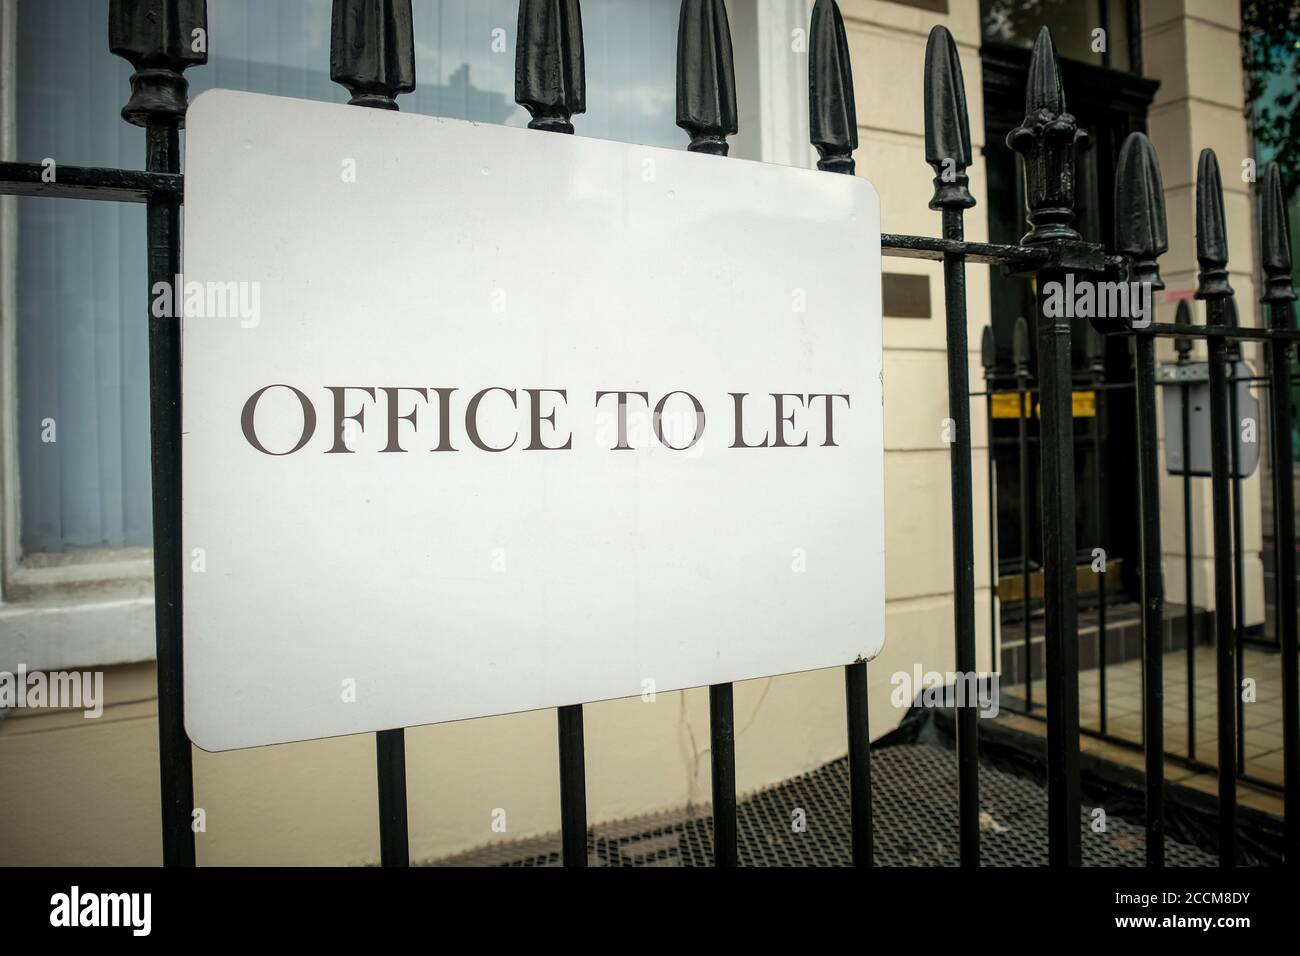 'Office To Let' sign on city street Stock Photo